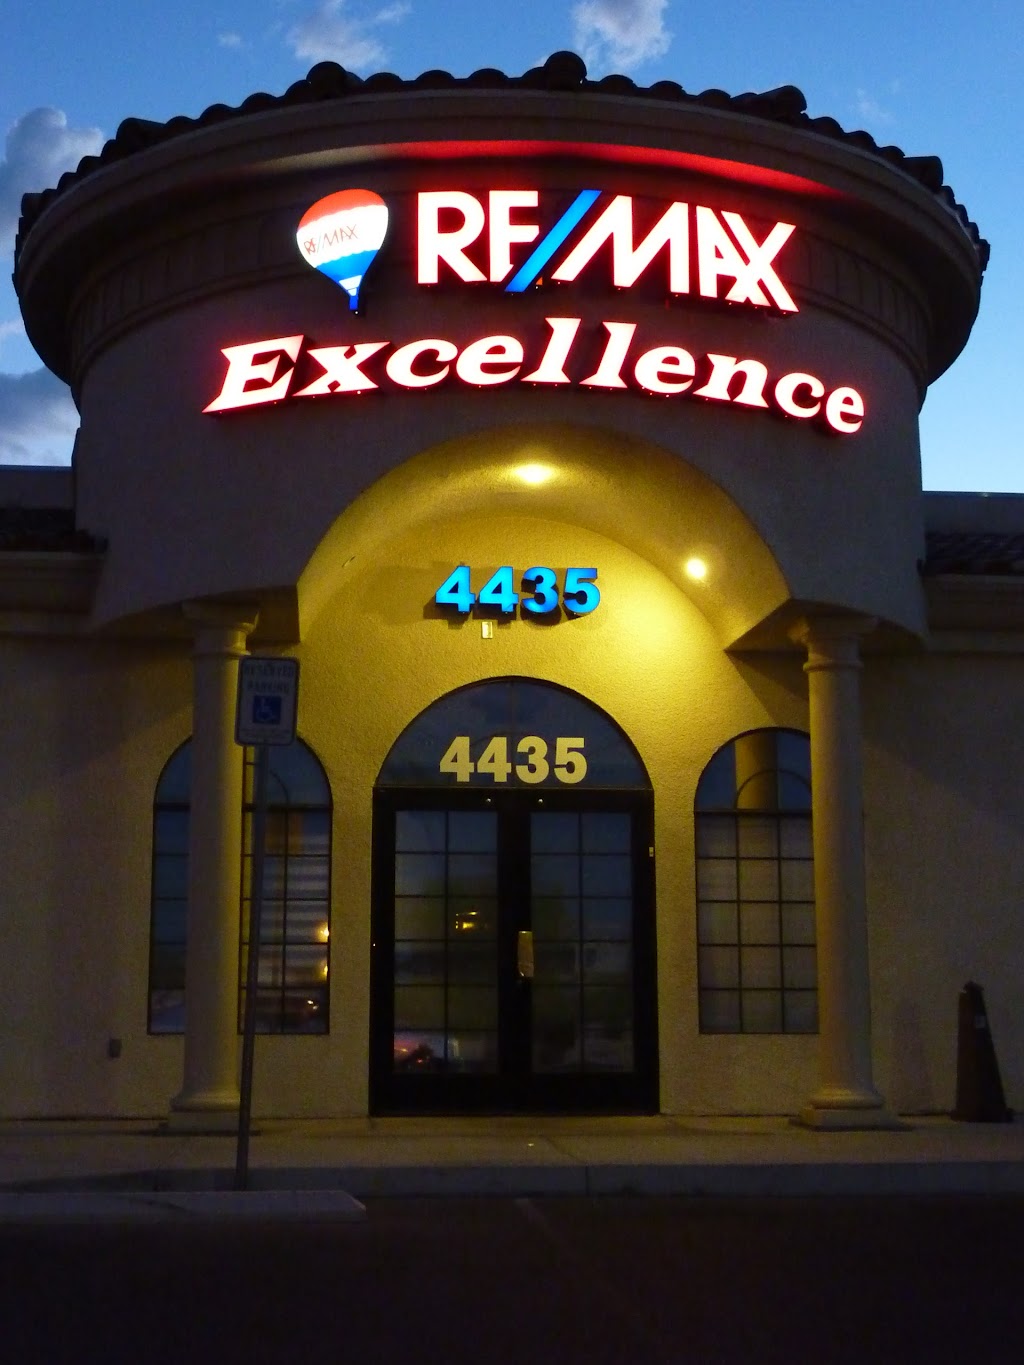 RE/MAX Excellence Tracey A. Donley | 4435 S Buffalo Dr, Las Vegas, NV 89147, USA | Phone: (702) 432-2700